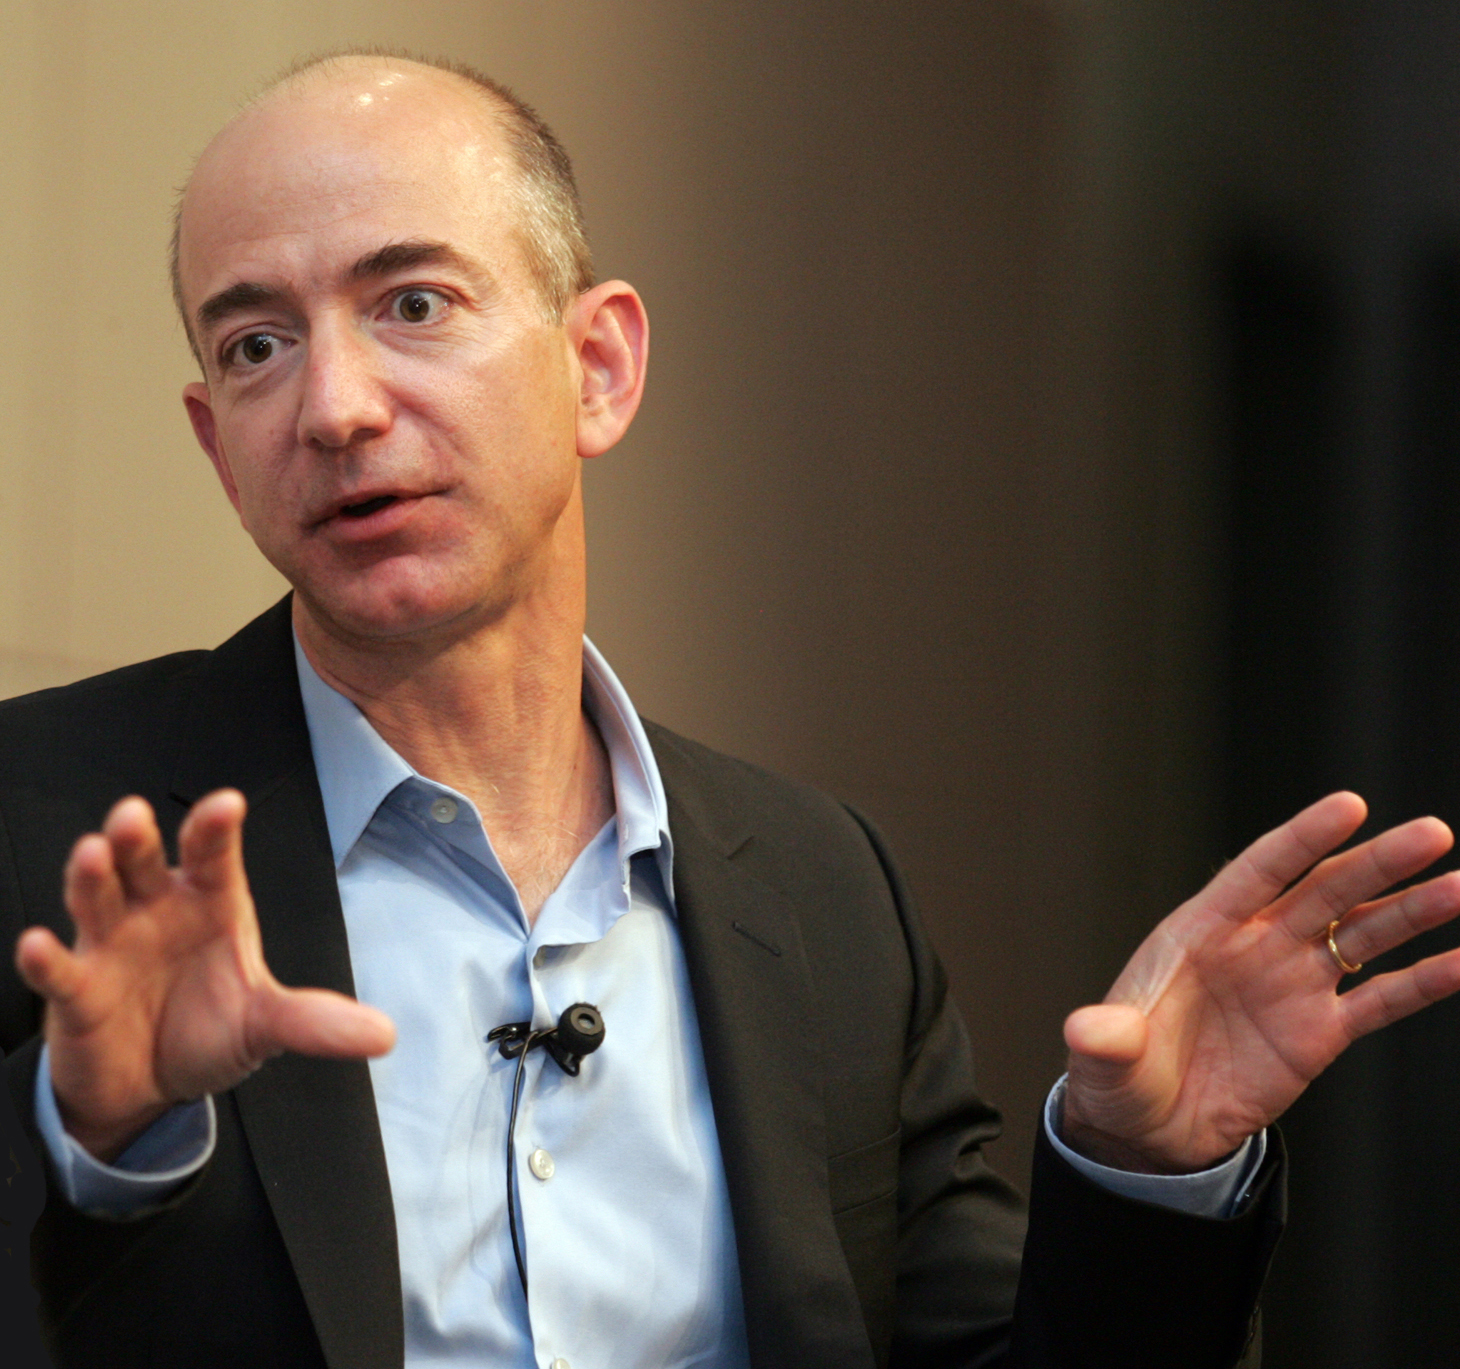 Jeff Bezos at the Book Expo in New York